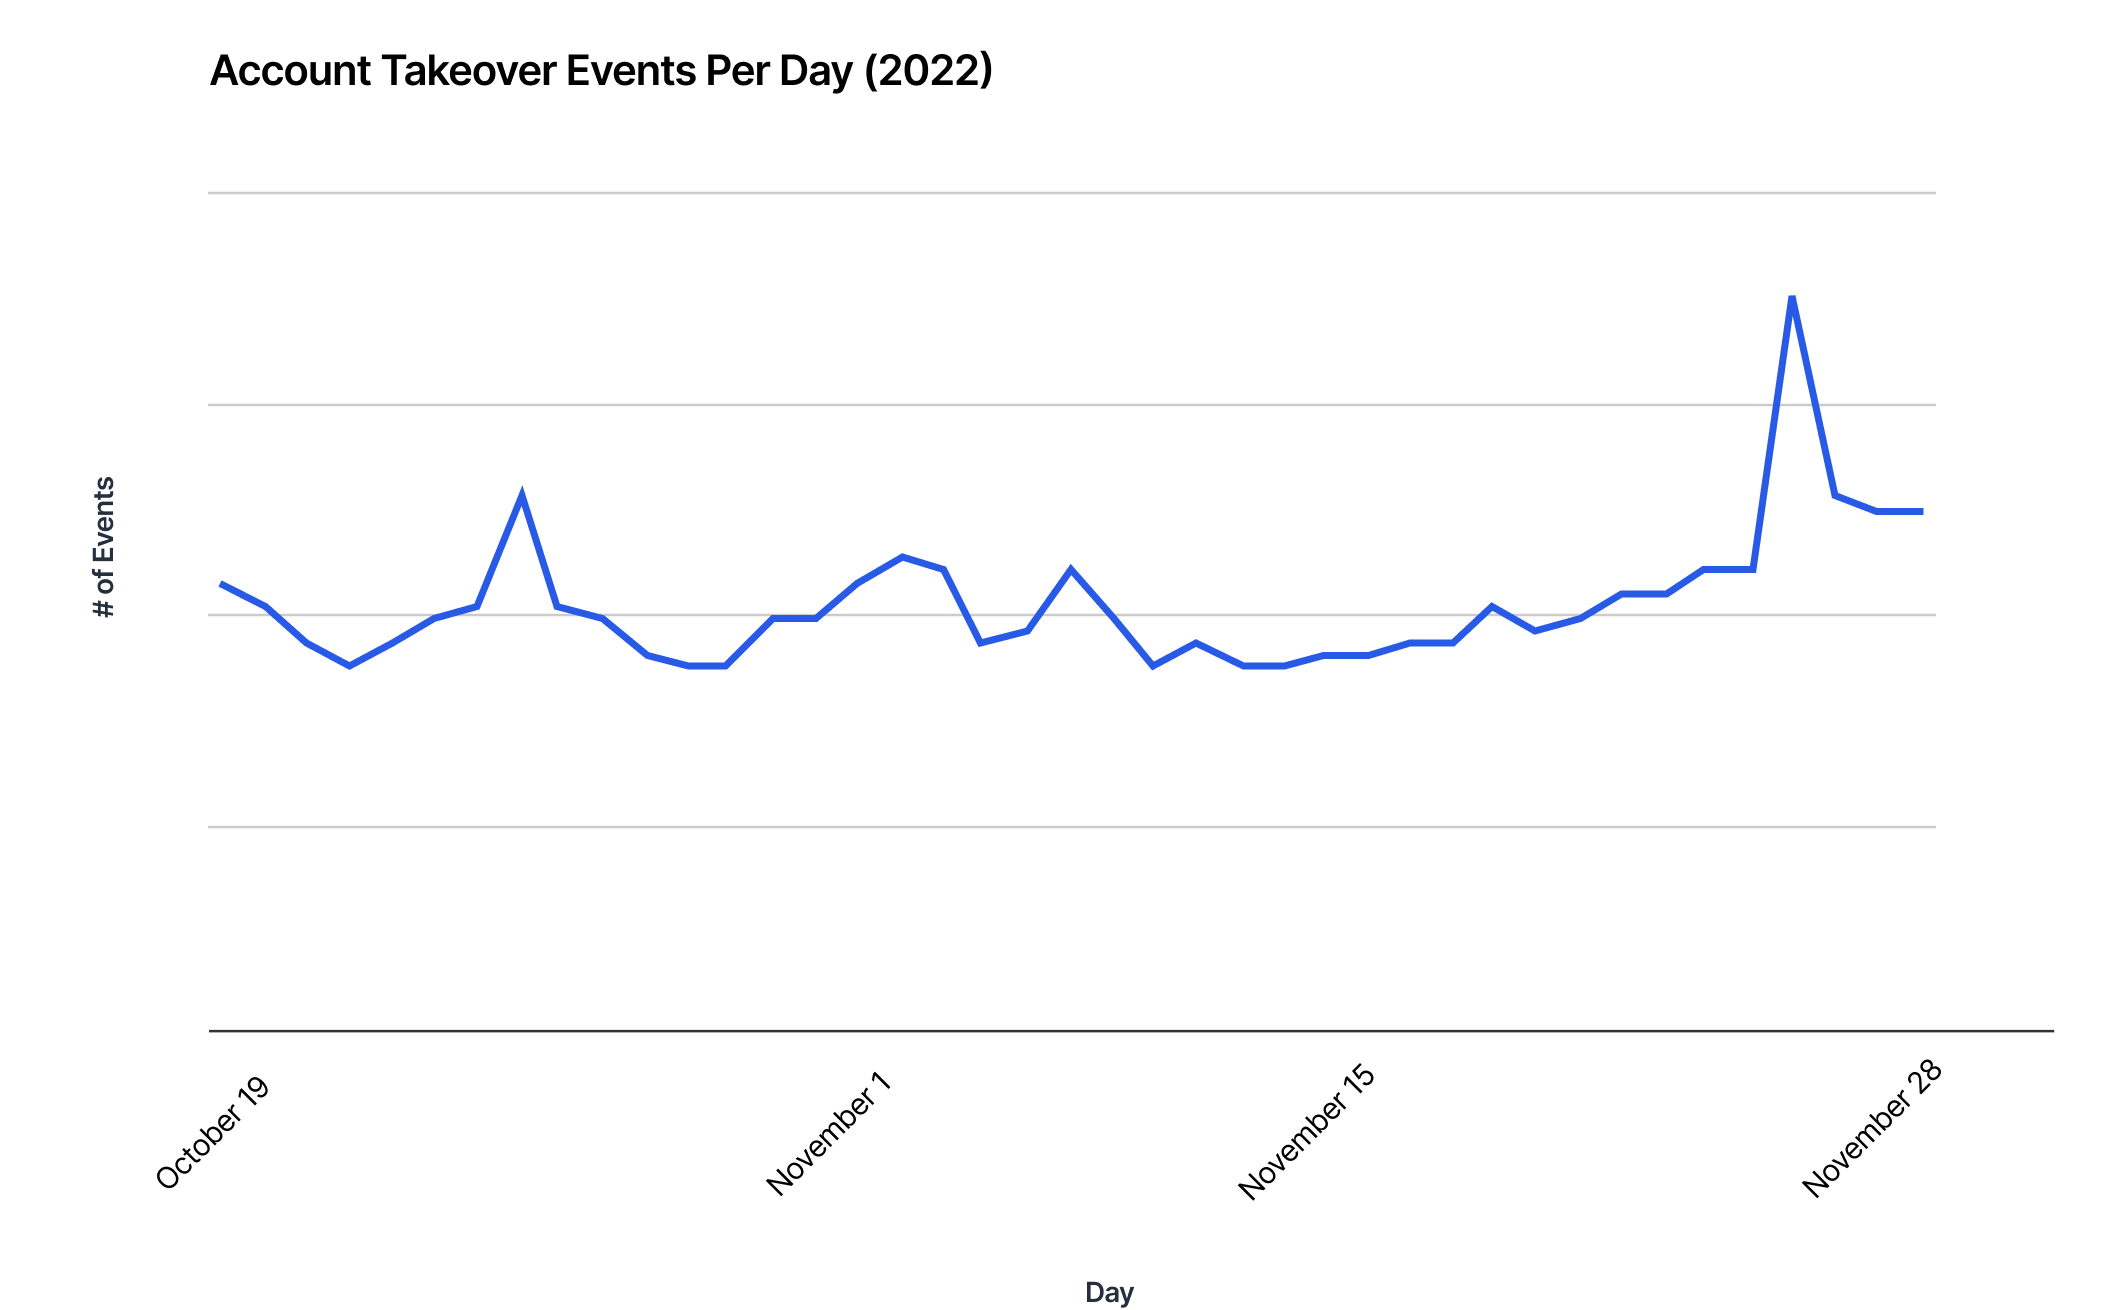 Graph showing account takeover events per day